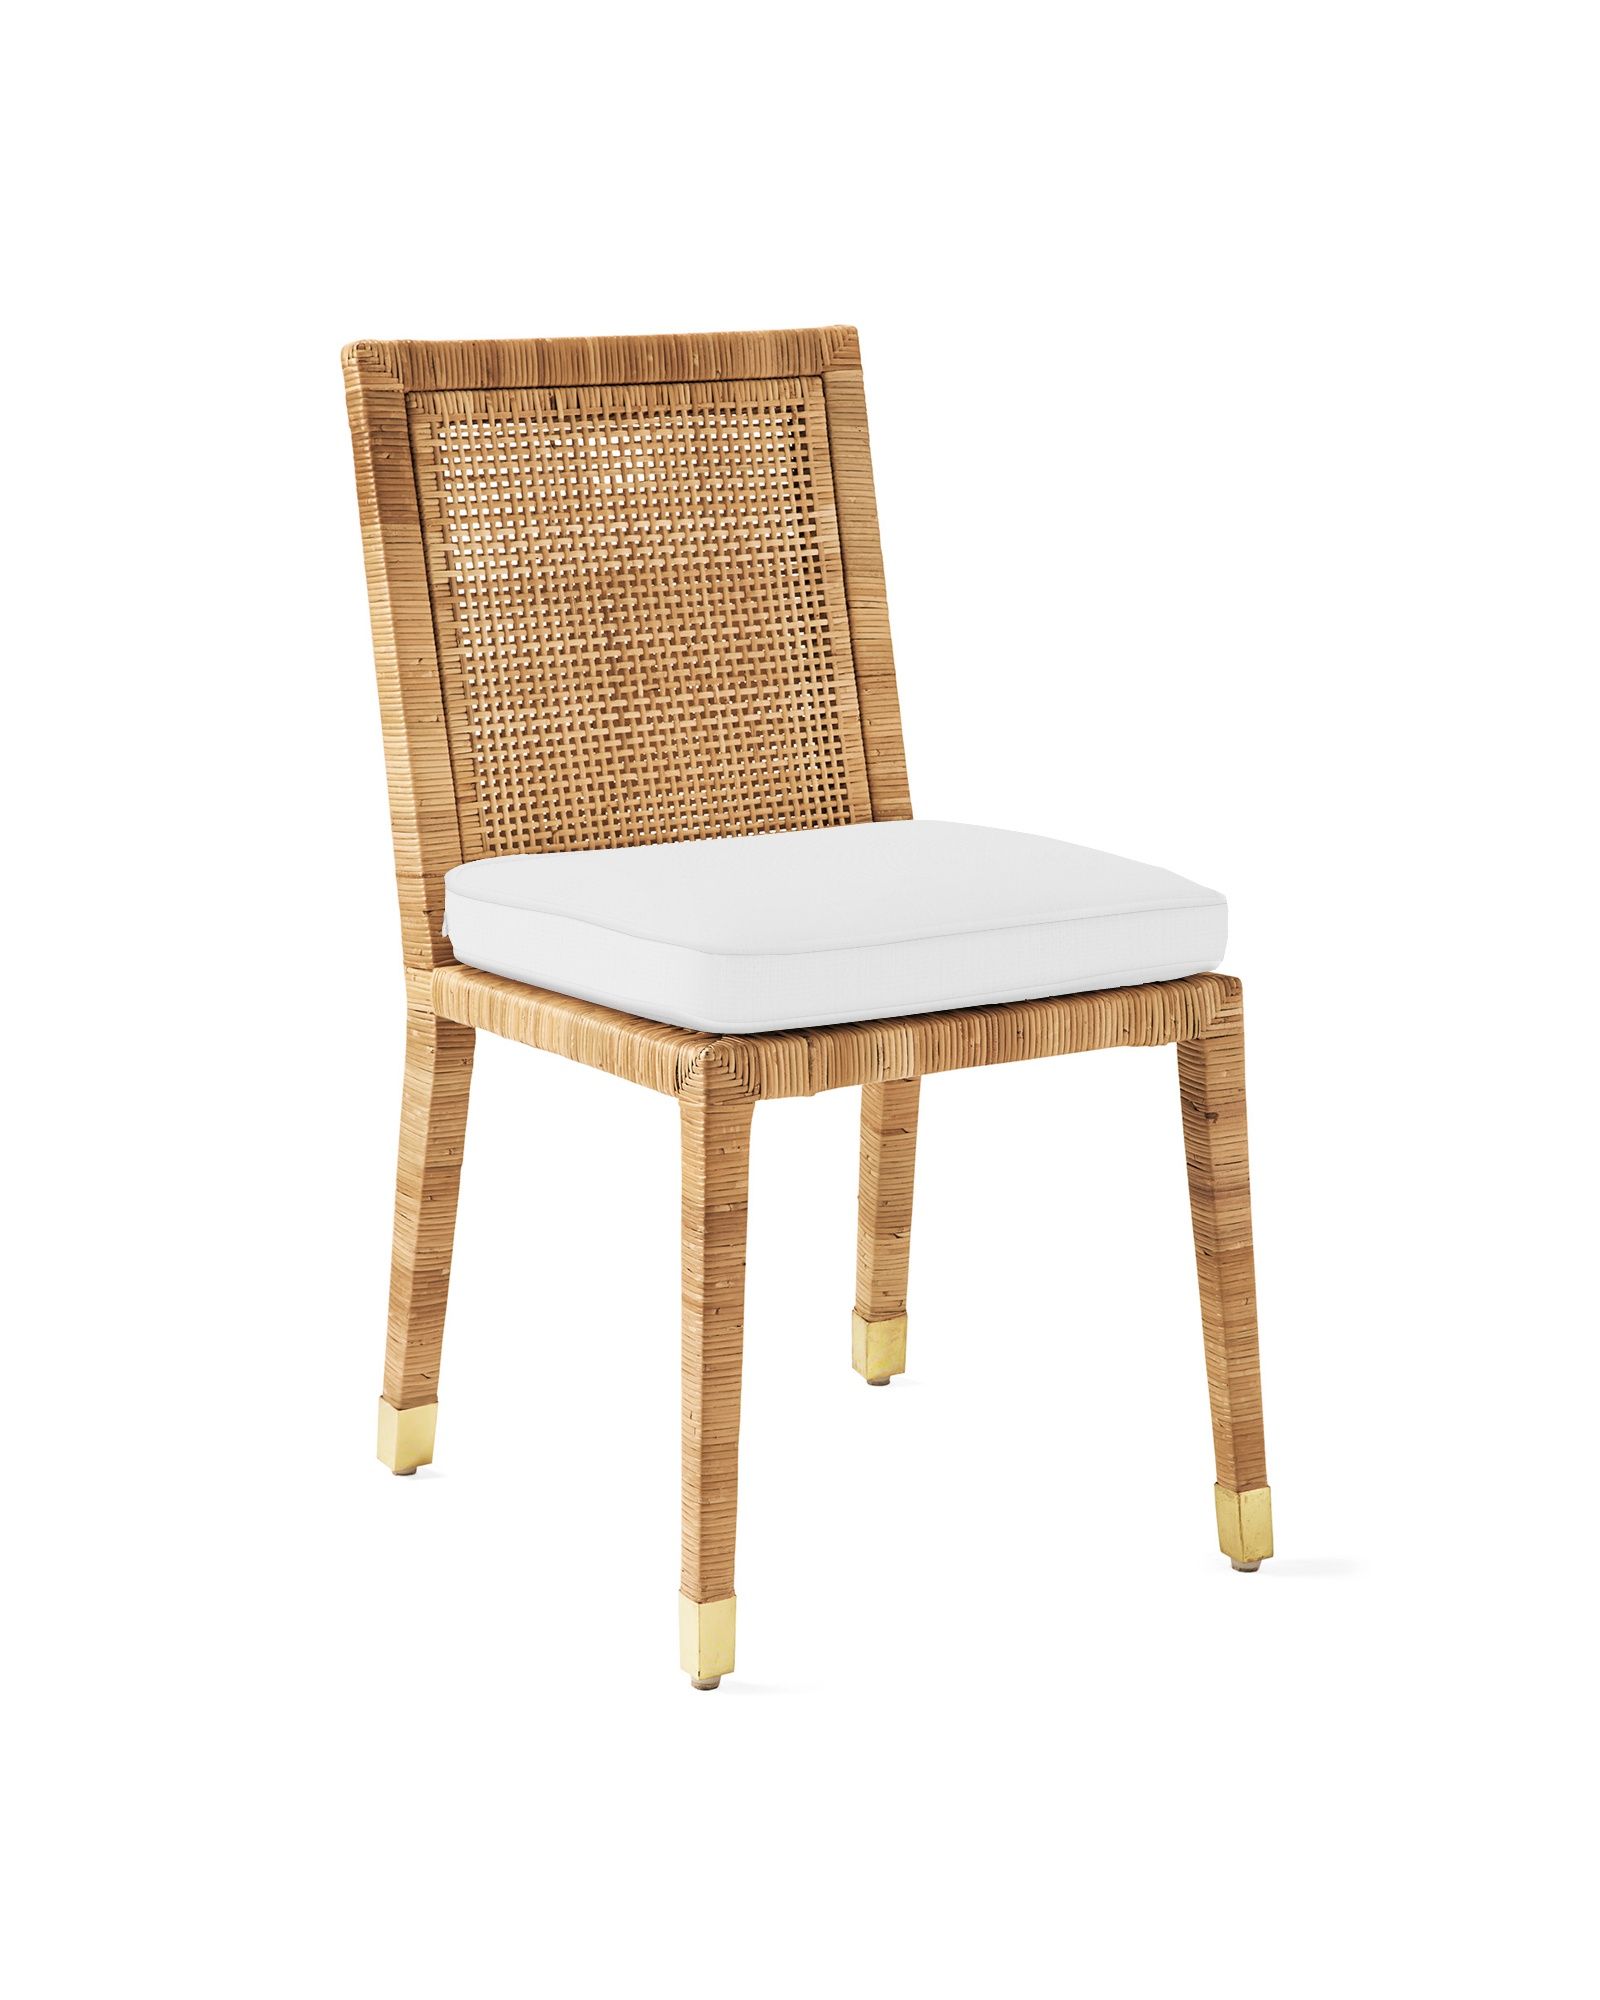 Balboa Side Chair - Natural
        CH255 | Serena and Lily